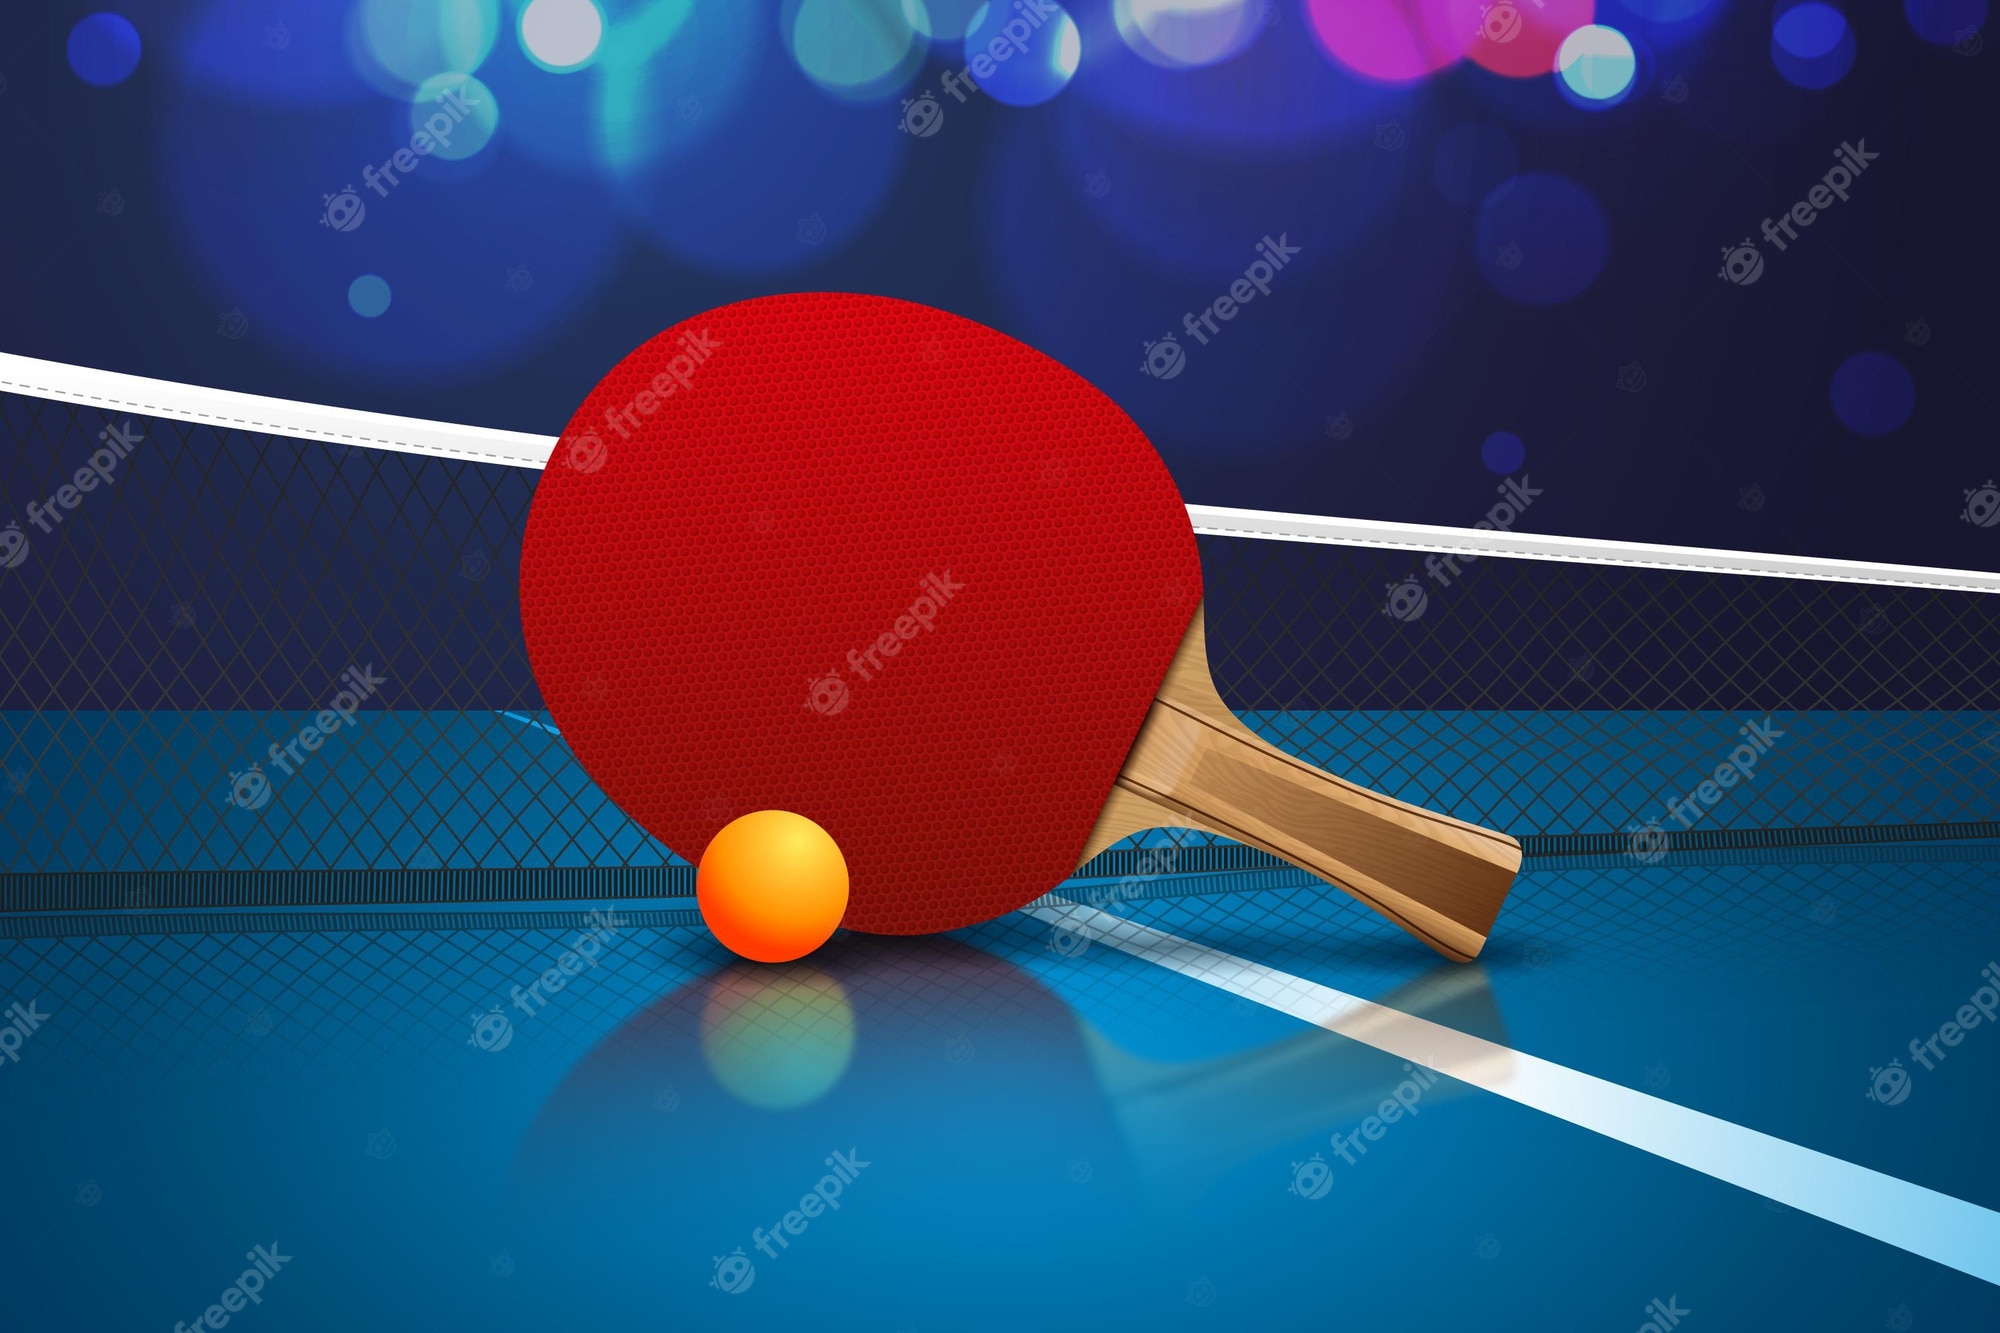 Free vector realistic table tennis background